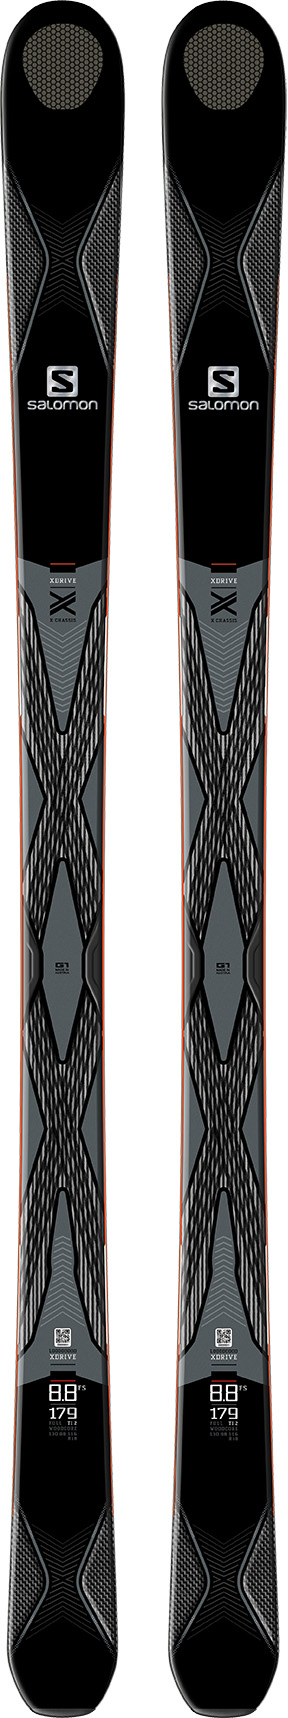 Go up and down Peeling Specifically 2nd Look: Salomon X-Drive 8.8 FS | Blister